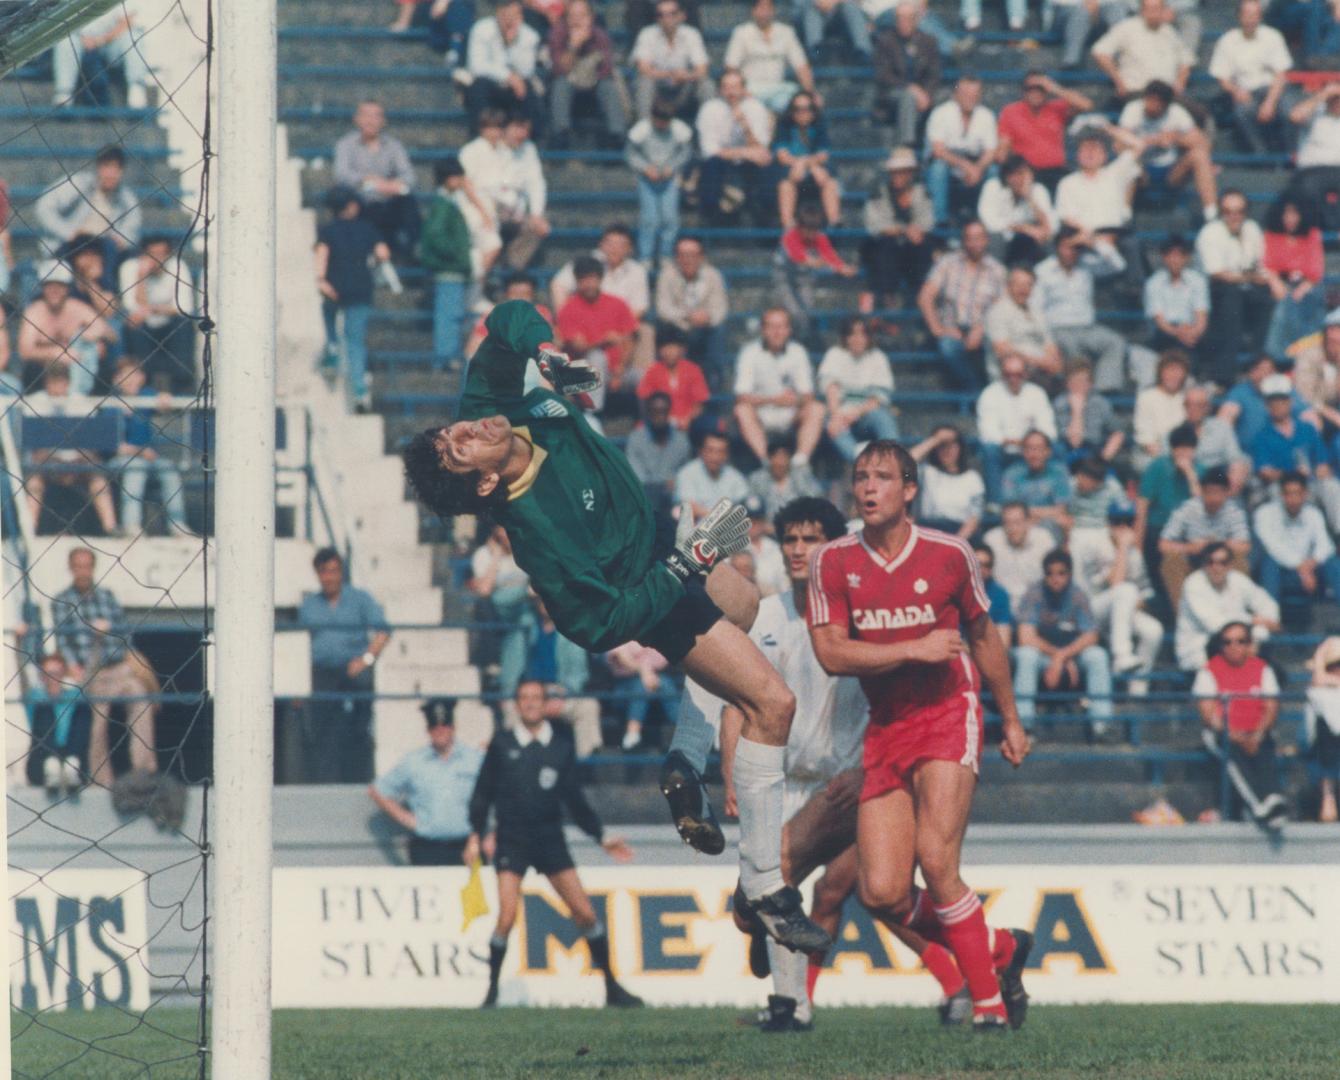 Nikos Sarganis normally has to keep busy guarding the goal against top-class European opposition in international play